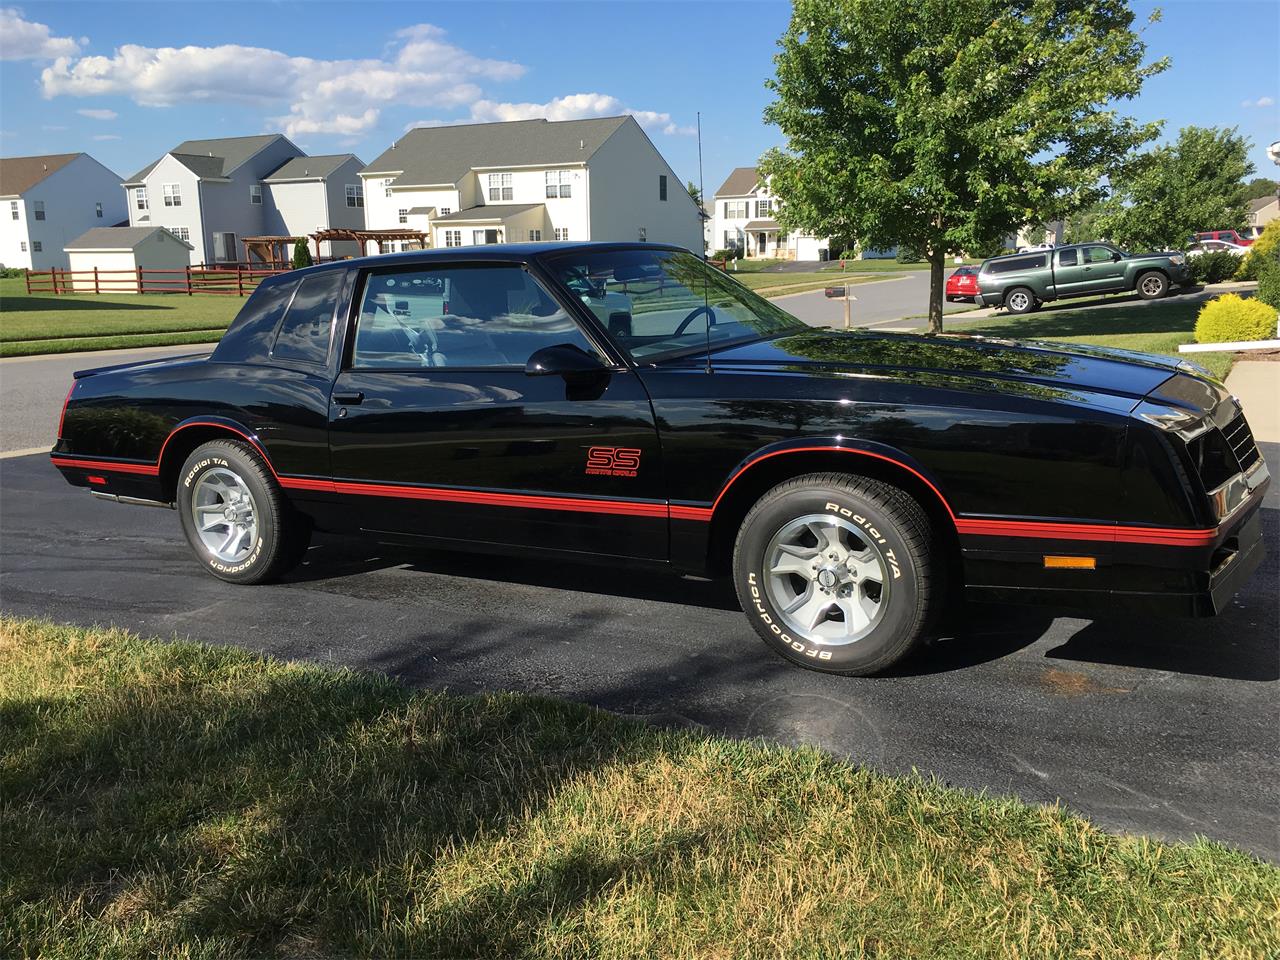 1988 chevrolet monte carlo ss for sale classiccars com cc 996135 1988 chevrolet monte carlo ss for sale